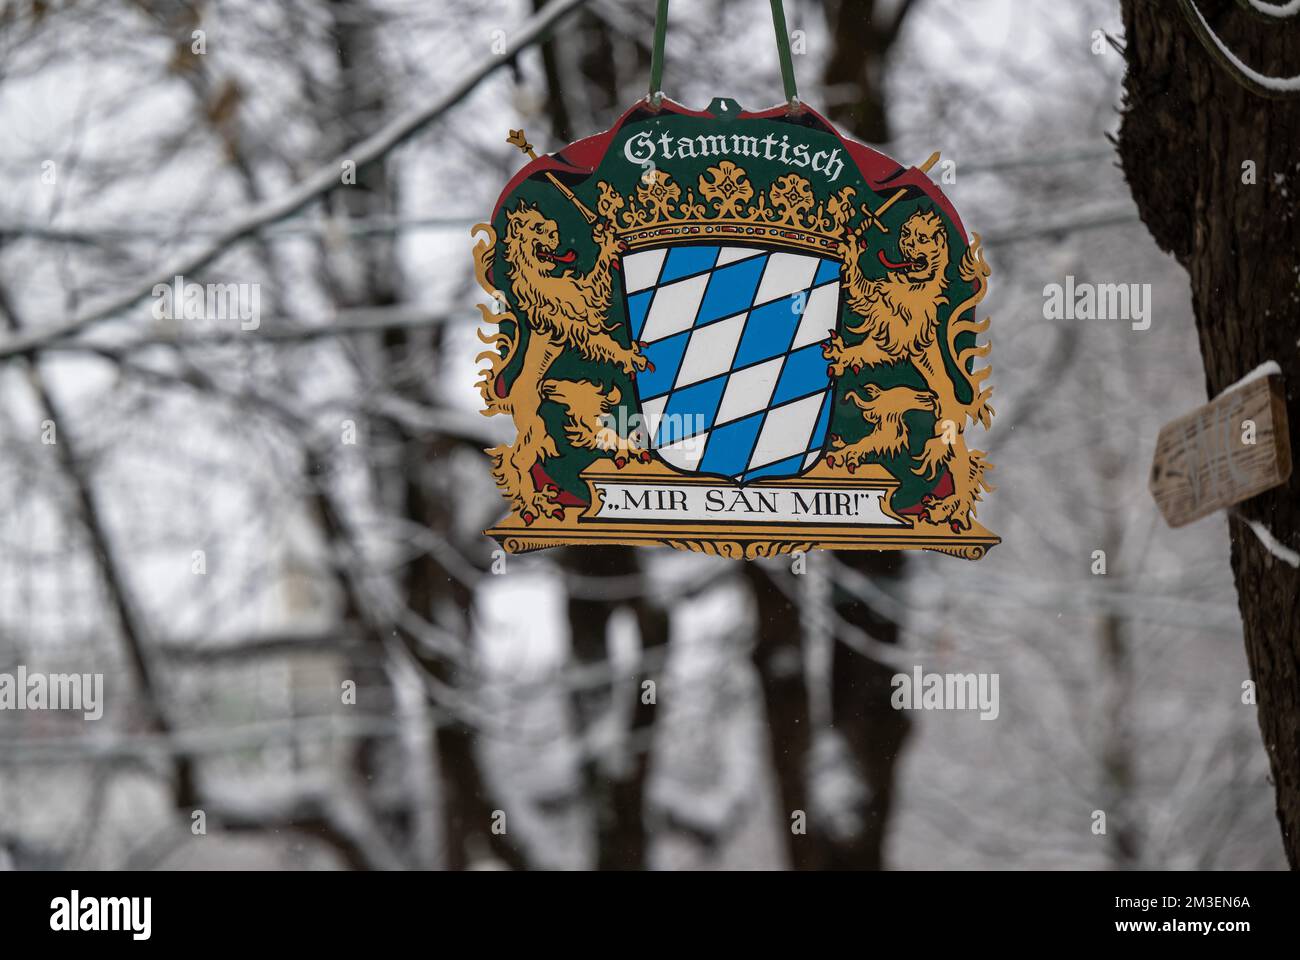 Munich, Germany. 15th Dec, 2022. A metal sign with the inscription 'Stammtisch - 'Mir sag Mir!' hangs in a snowy beer garden in the Haidhausen district. Credit: Peter Kneffel/dpa/Alamy Live News Stock Photo